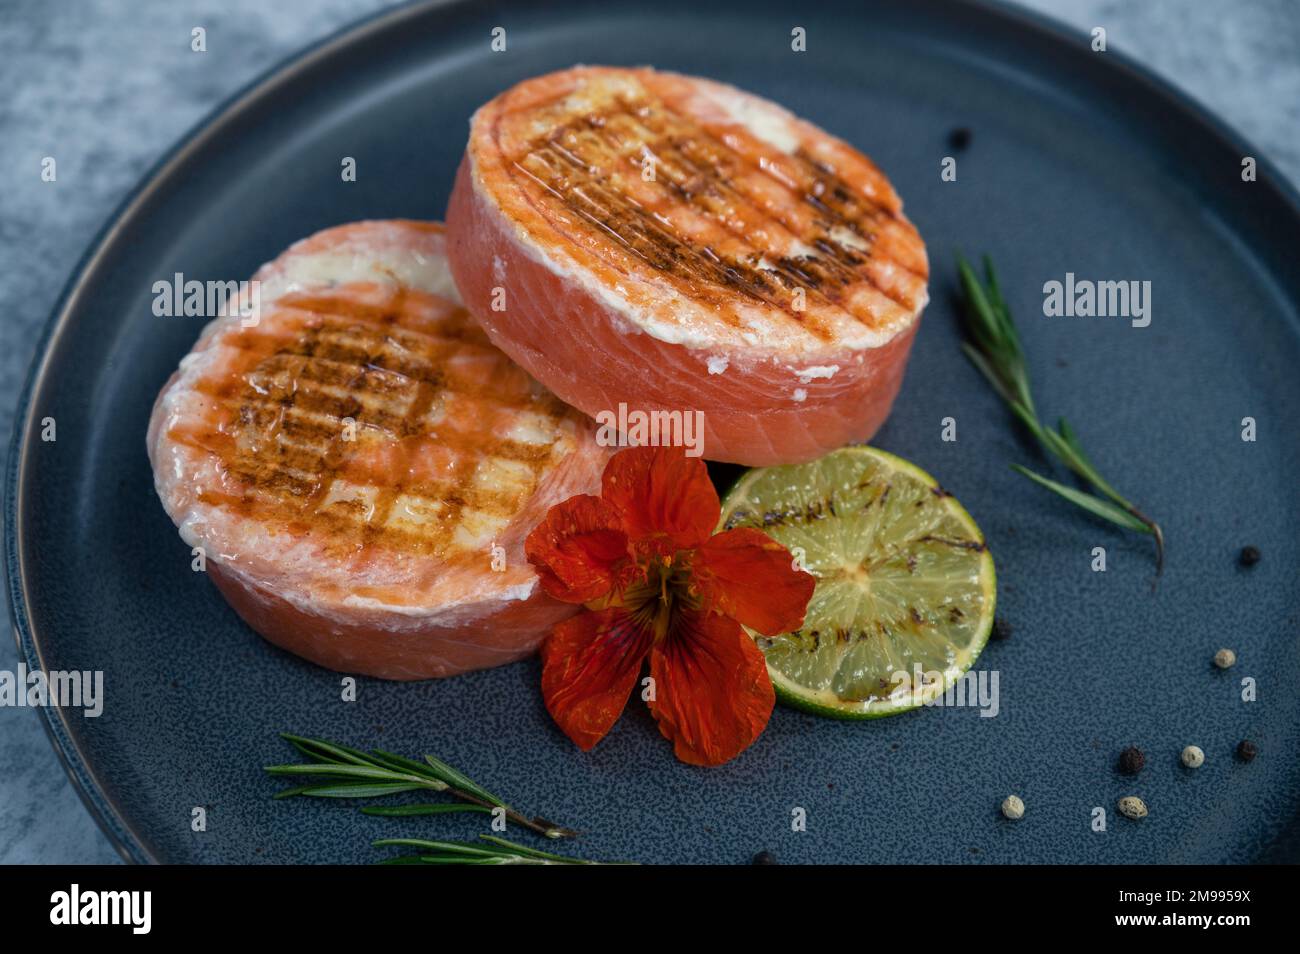 Grilled salmon roll with mozzarella. Decorated with greens lime and edible flower Stock Photo